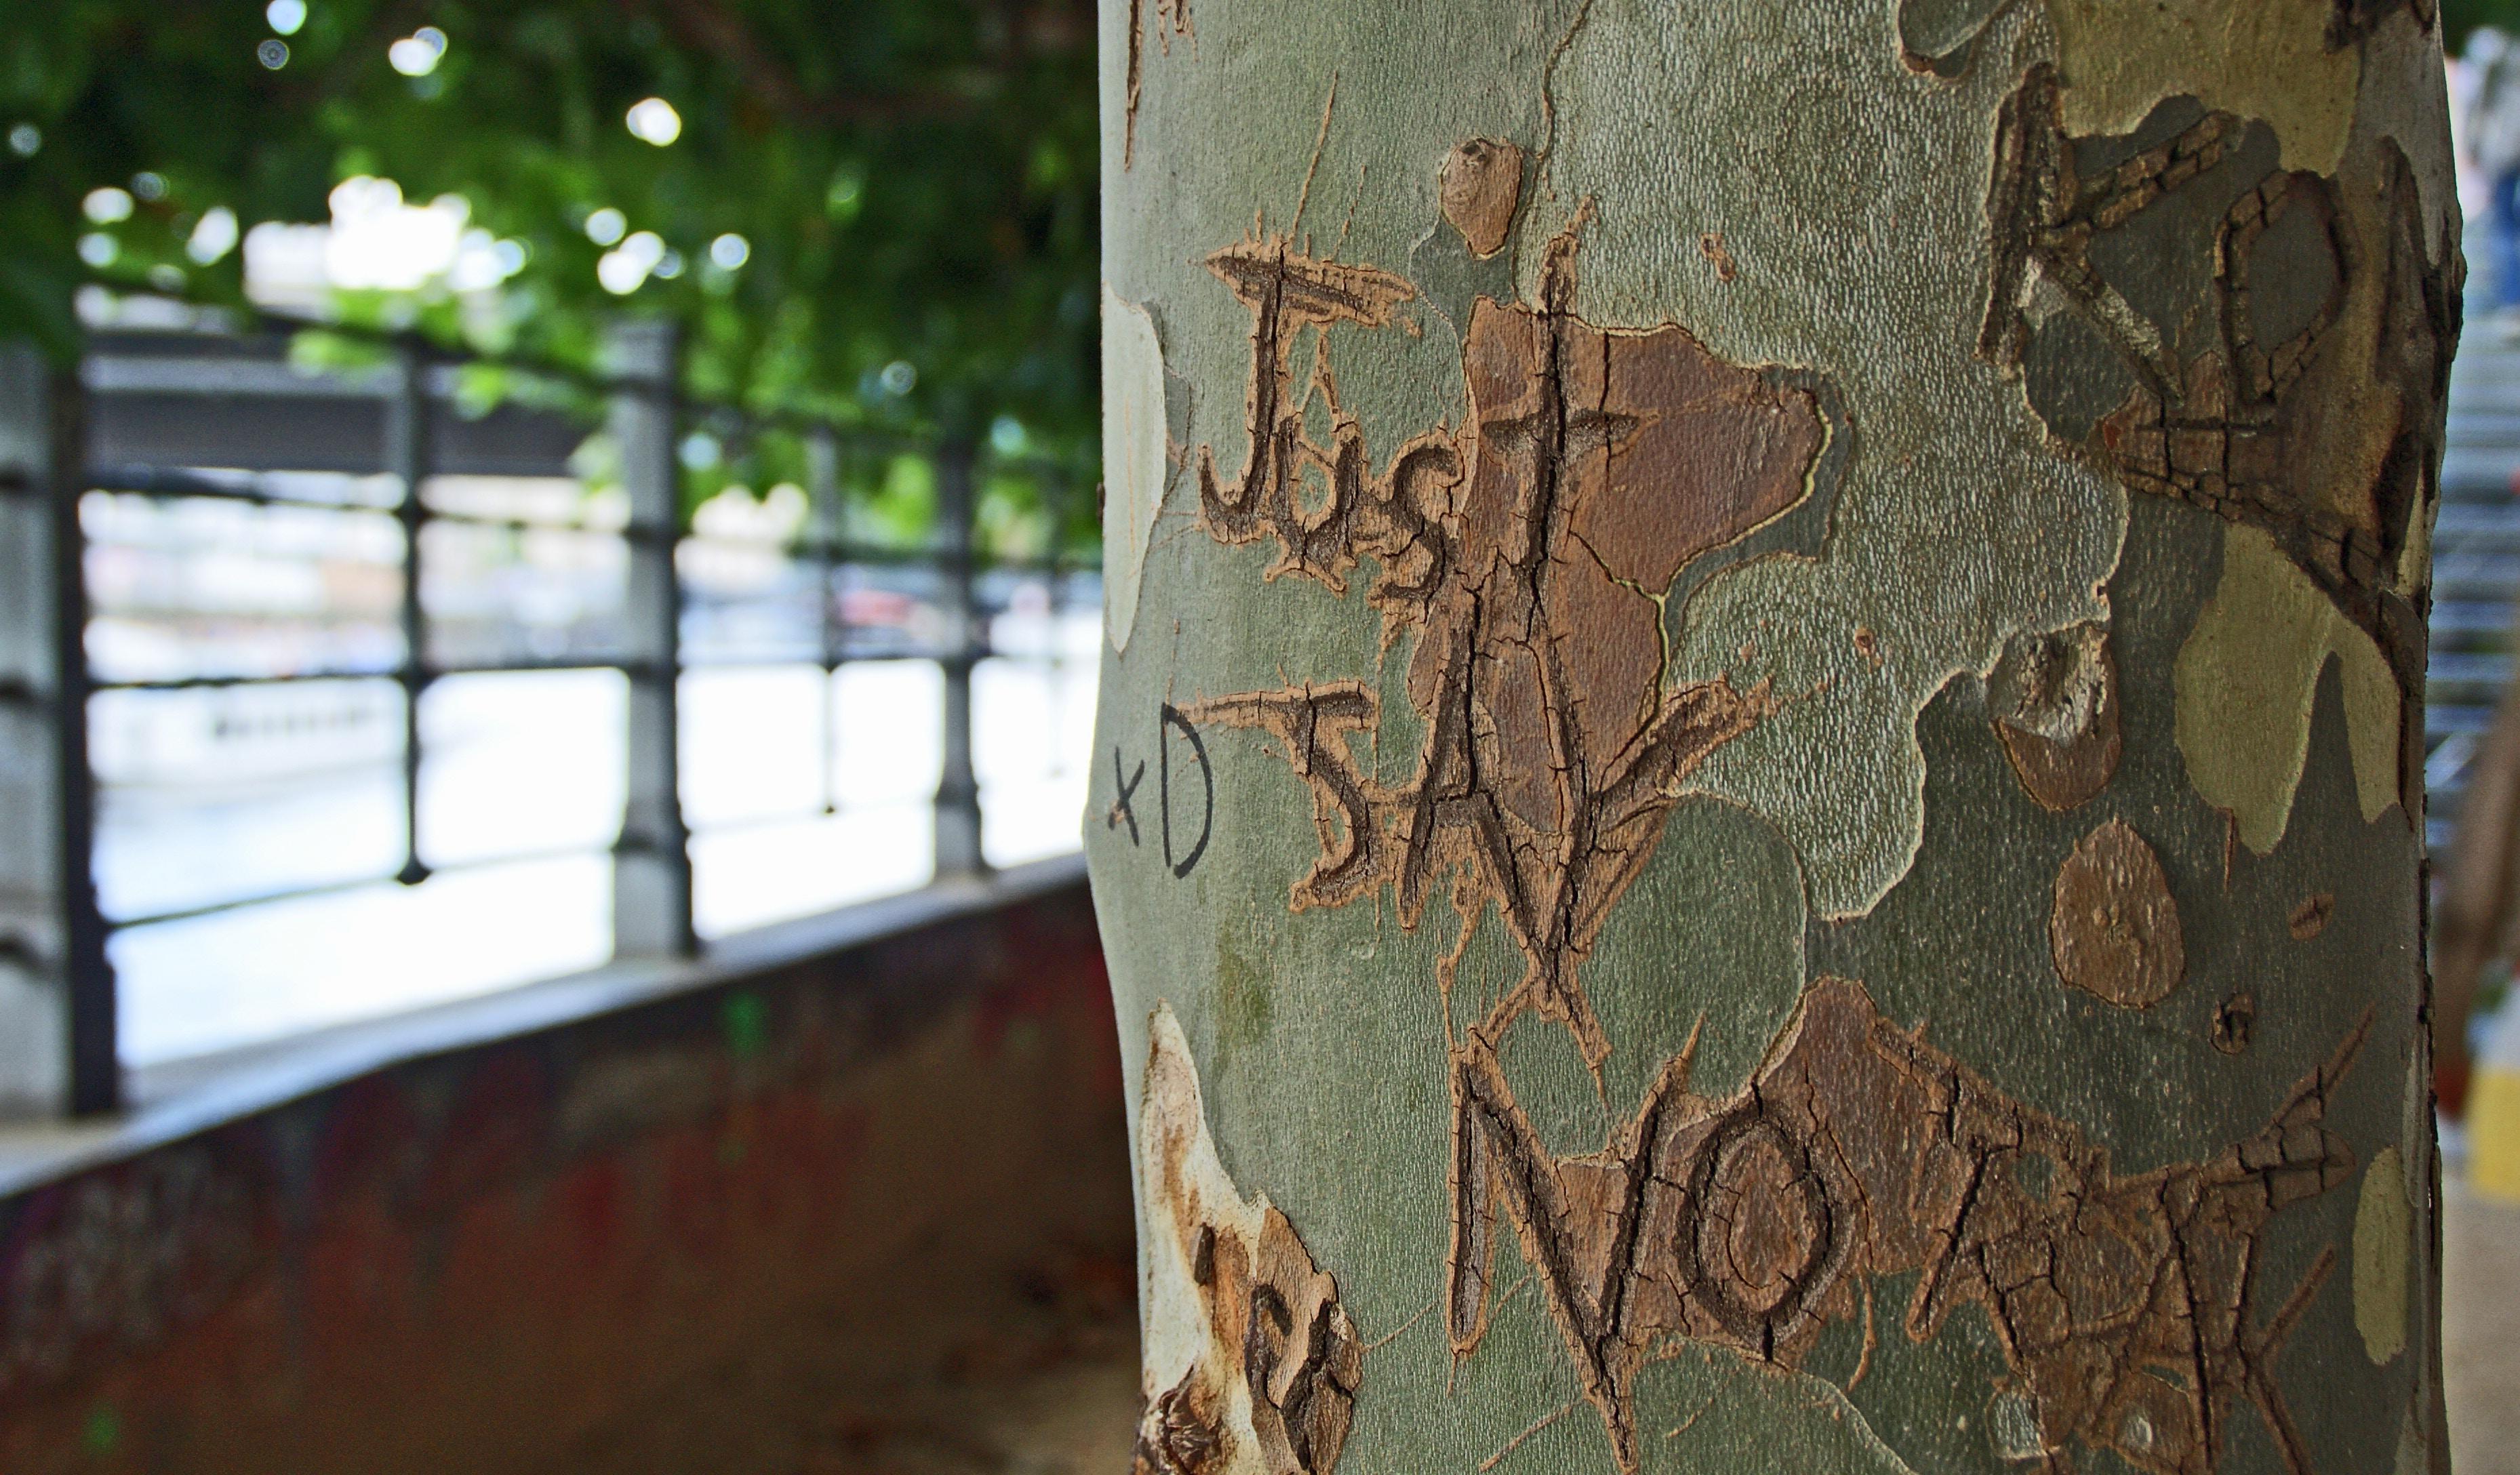 Tree with 'just say no' carved into it. Photo by Andy Tootell on Unsplash